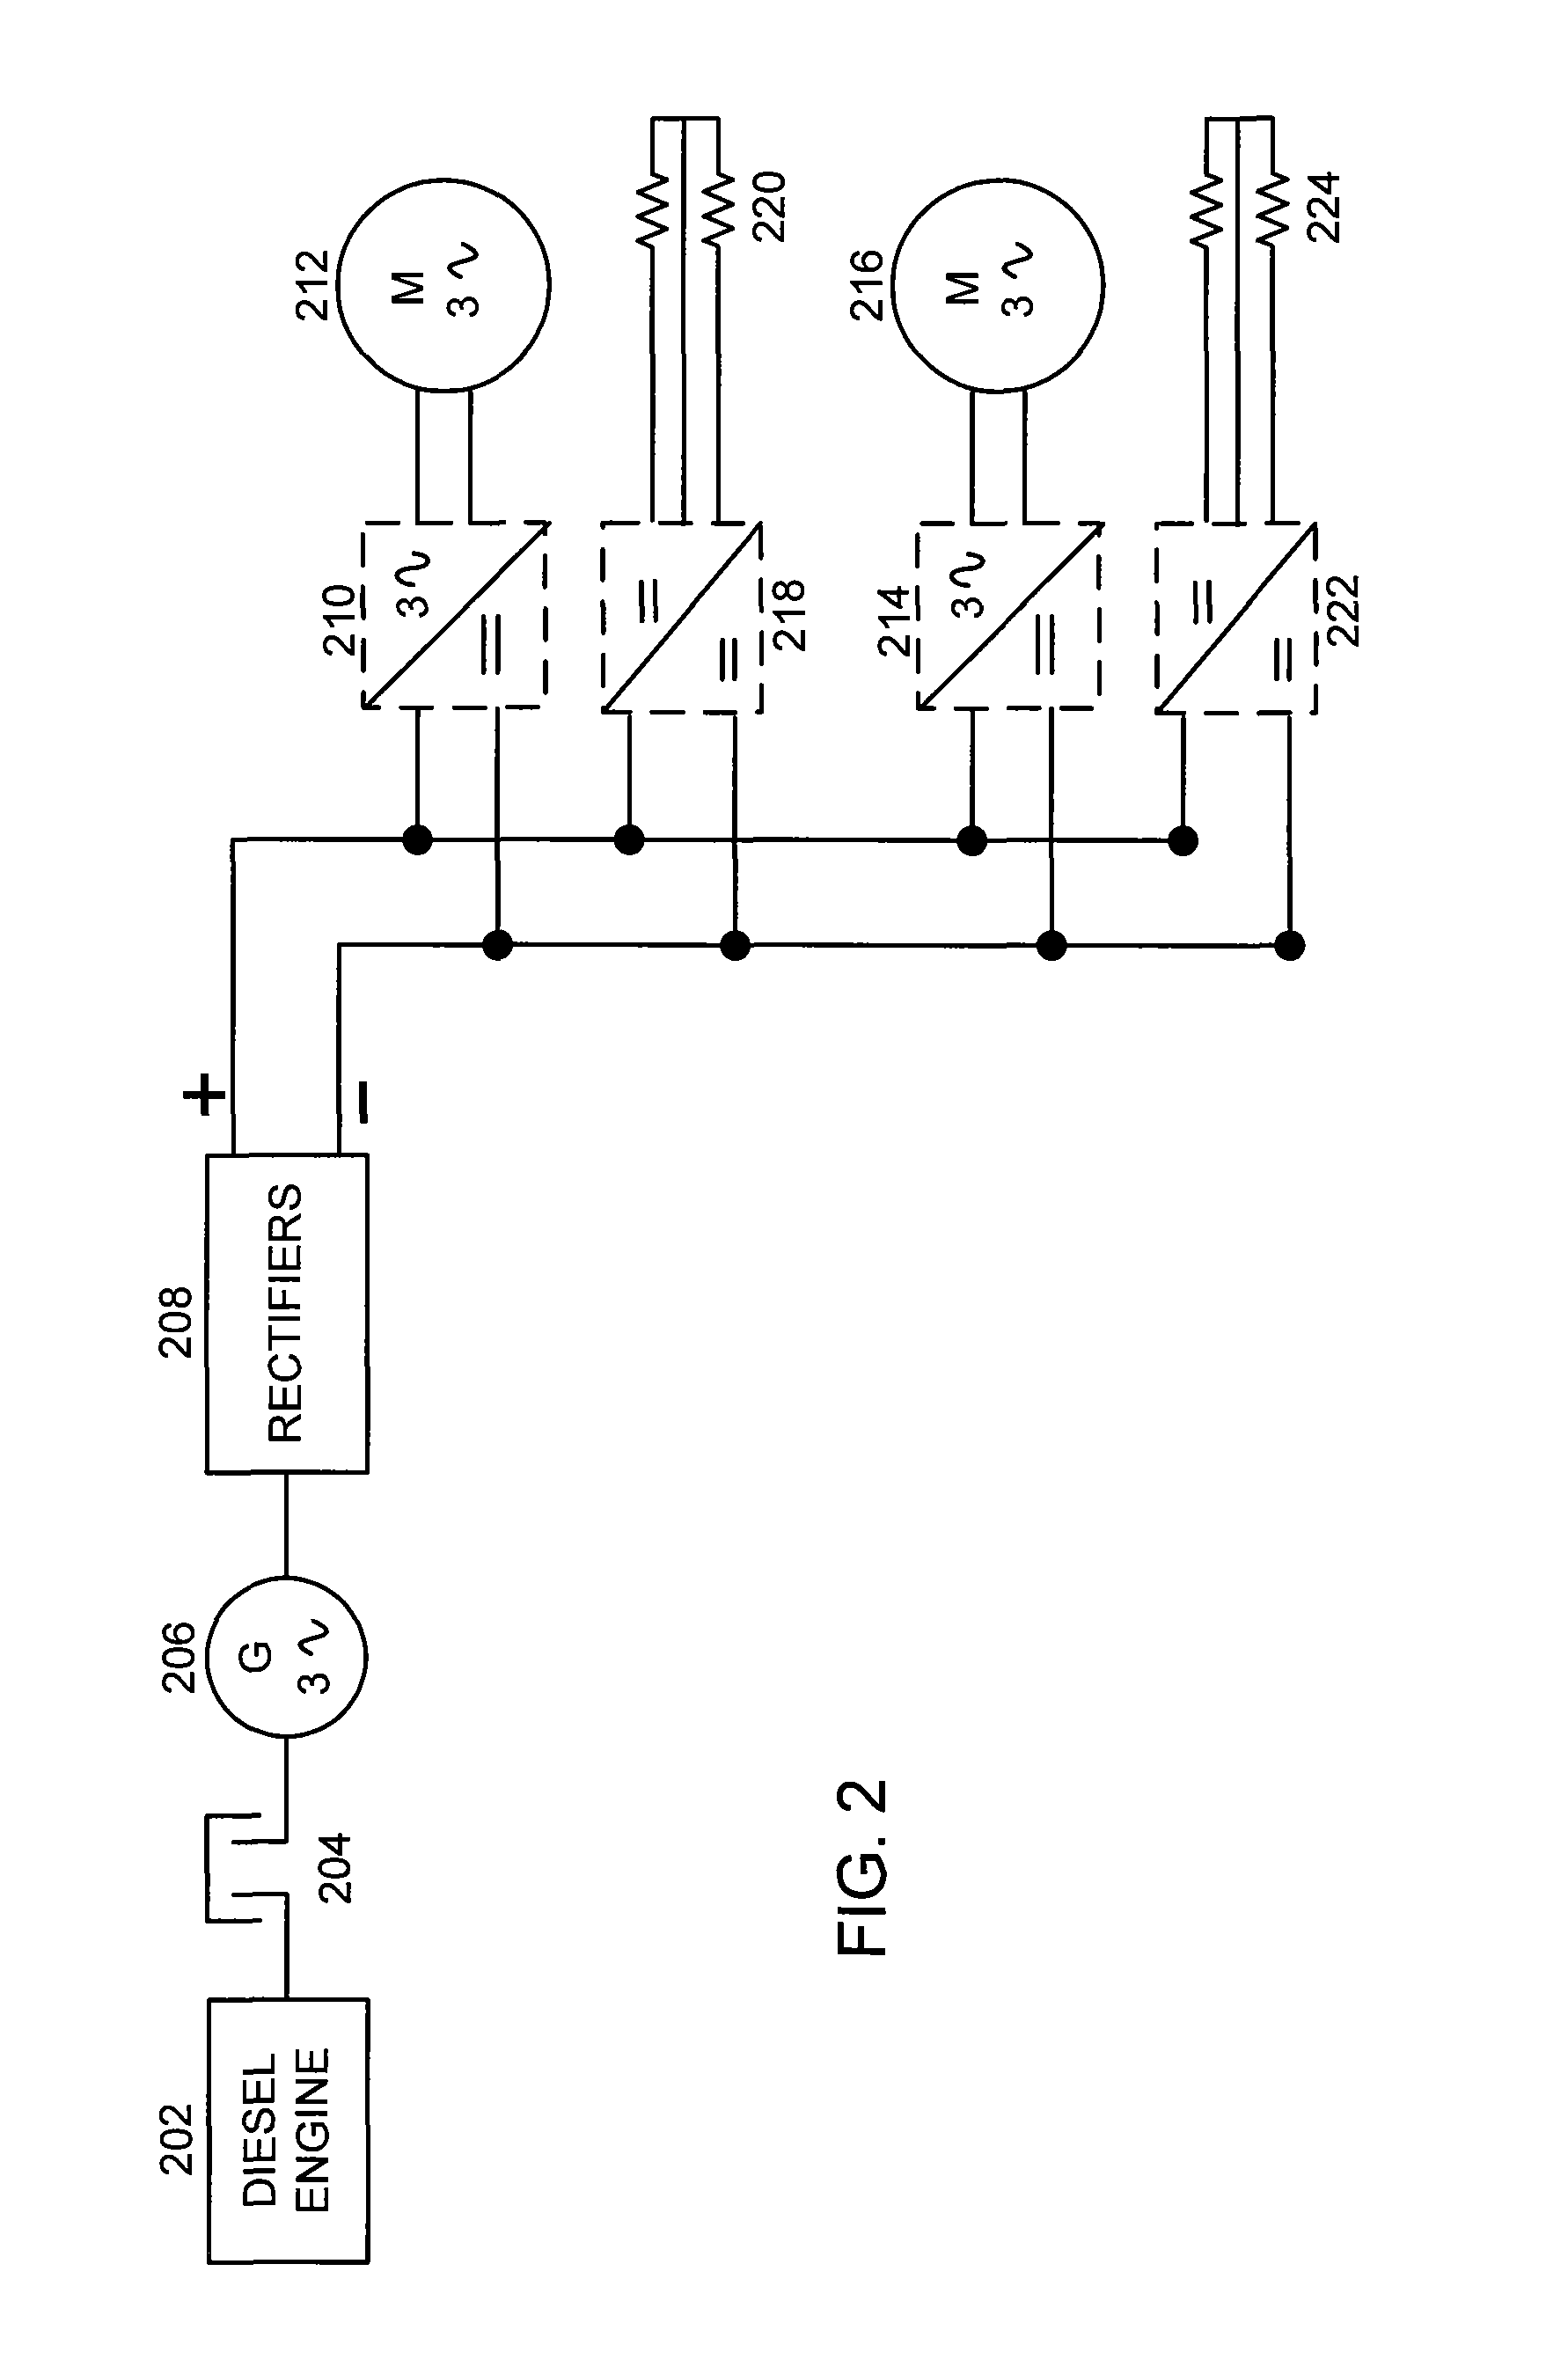 System and method for reinjection of retard energy in a trolley-based electric mining haul truck